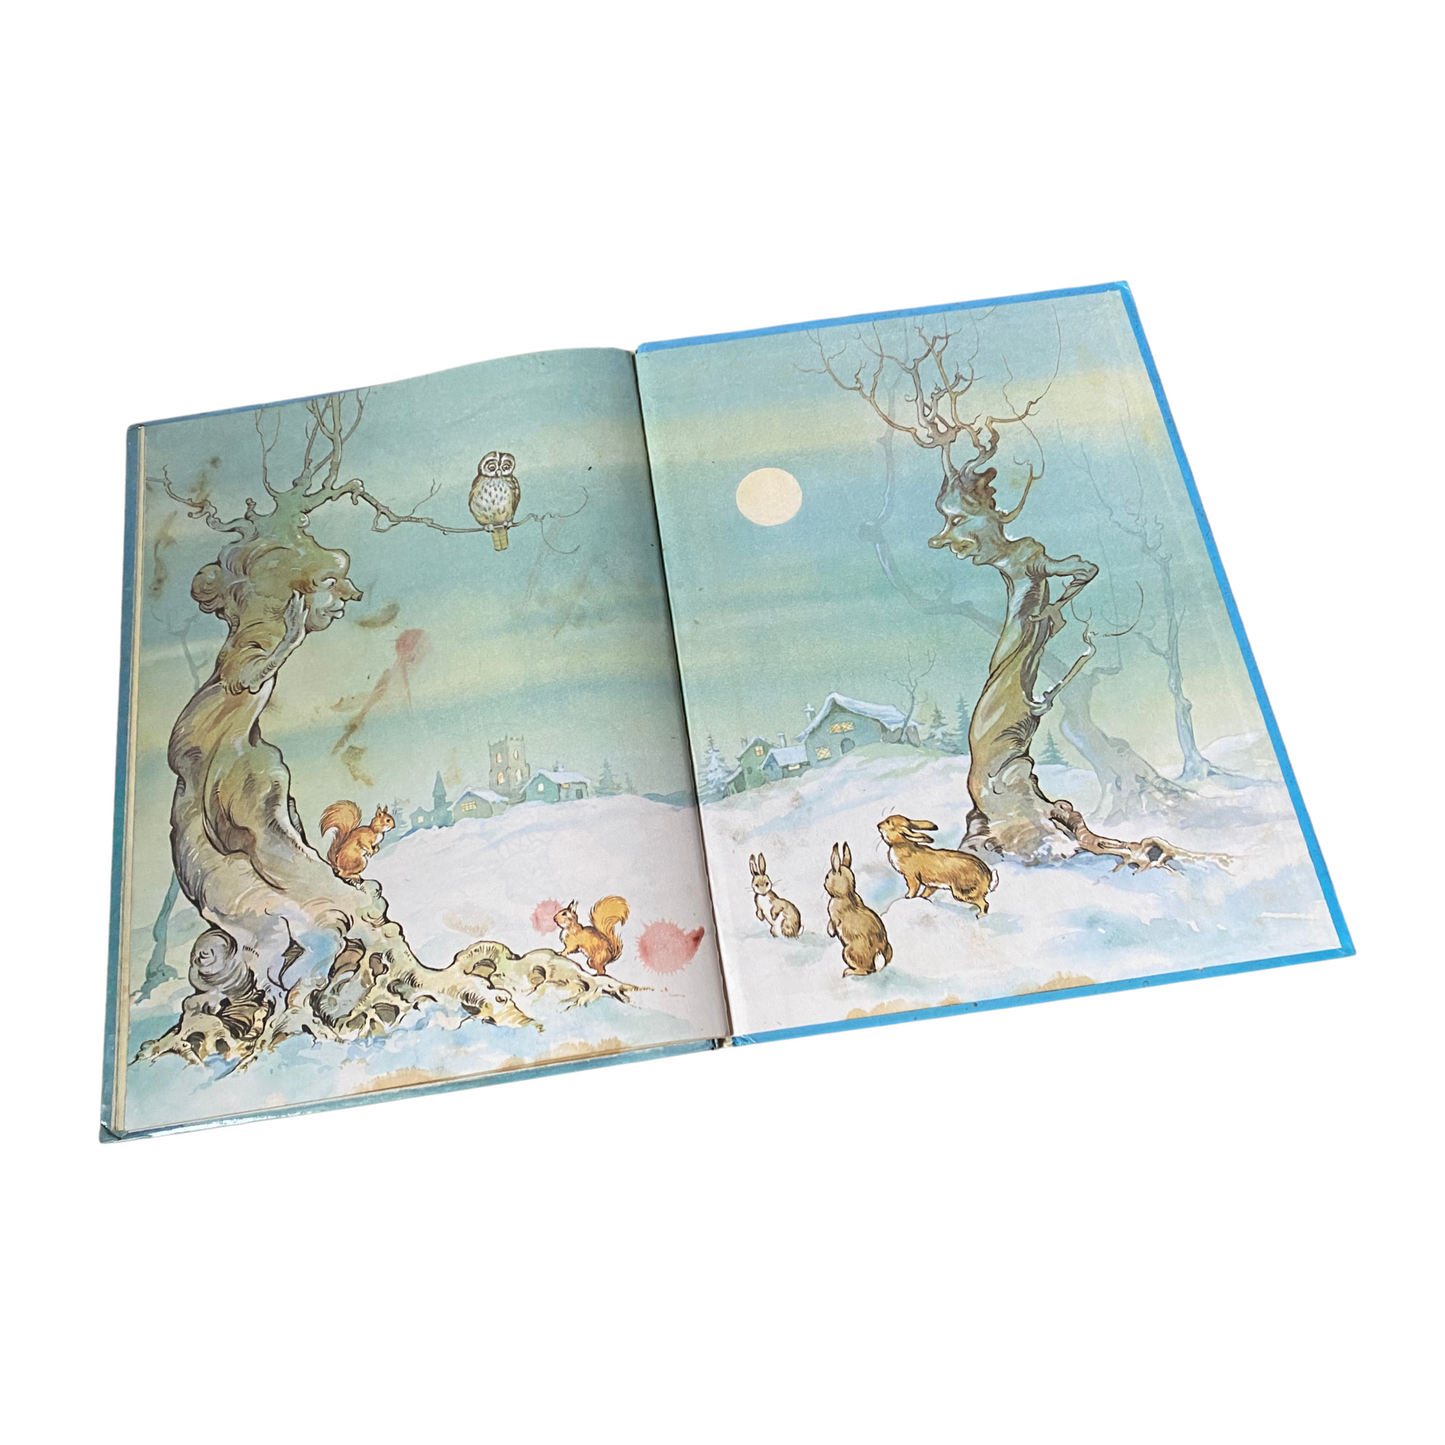 The Night Before Christmas: 1980 Illustrated Hardback book of the 1822 poem by Clement C. Moore - A Timeless Classic to share at Christmas